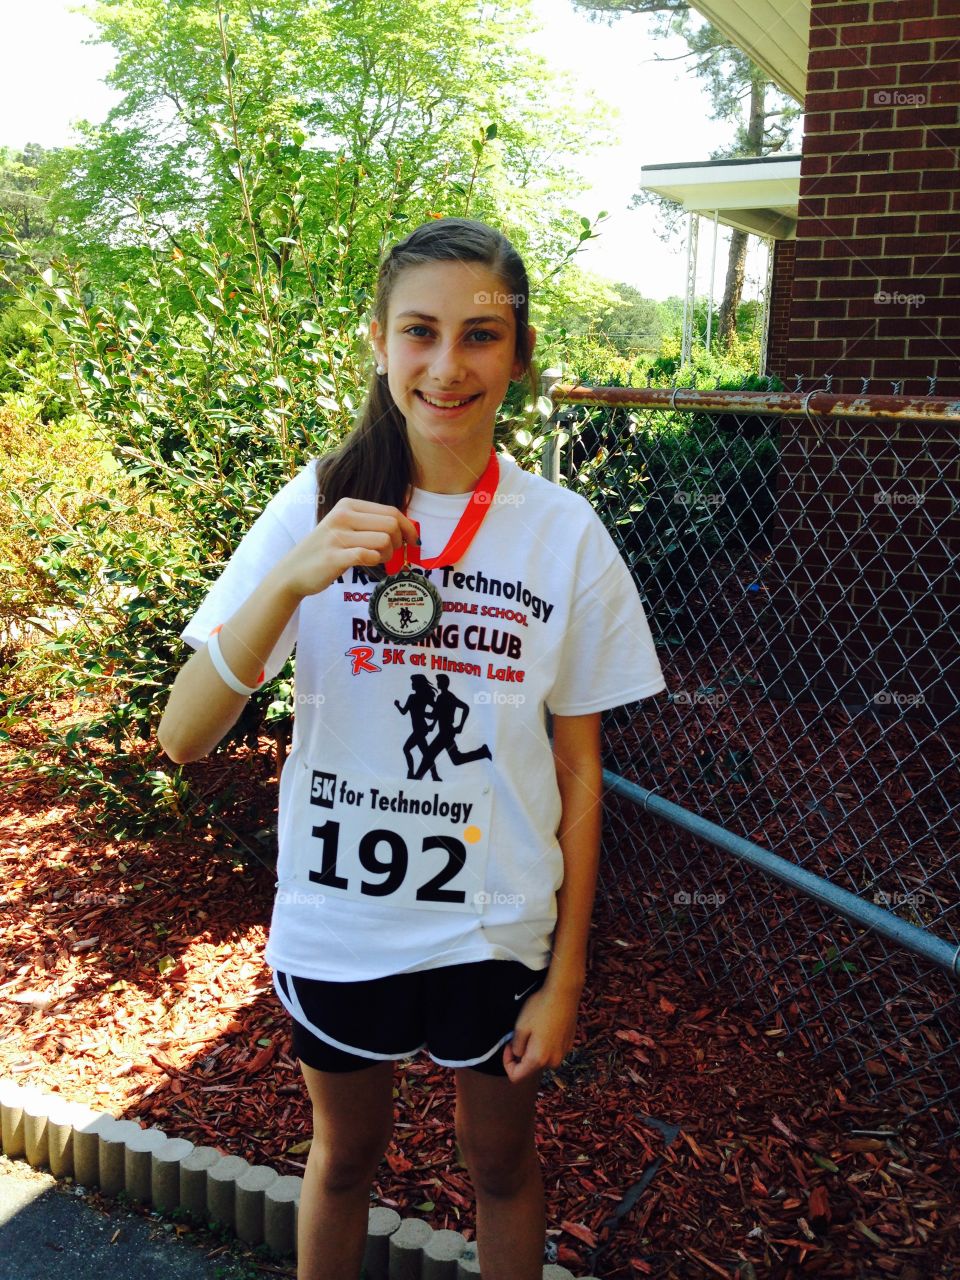 5k 2nd place runner up . Girl ran 5k she got a second place medal